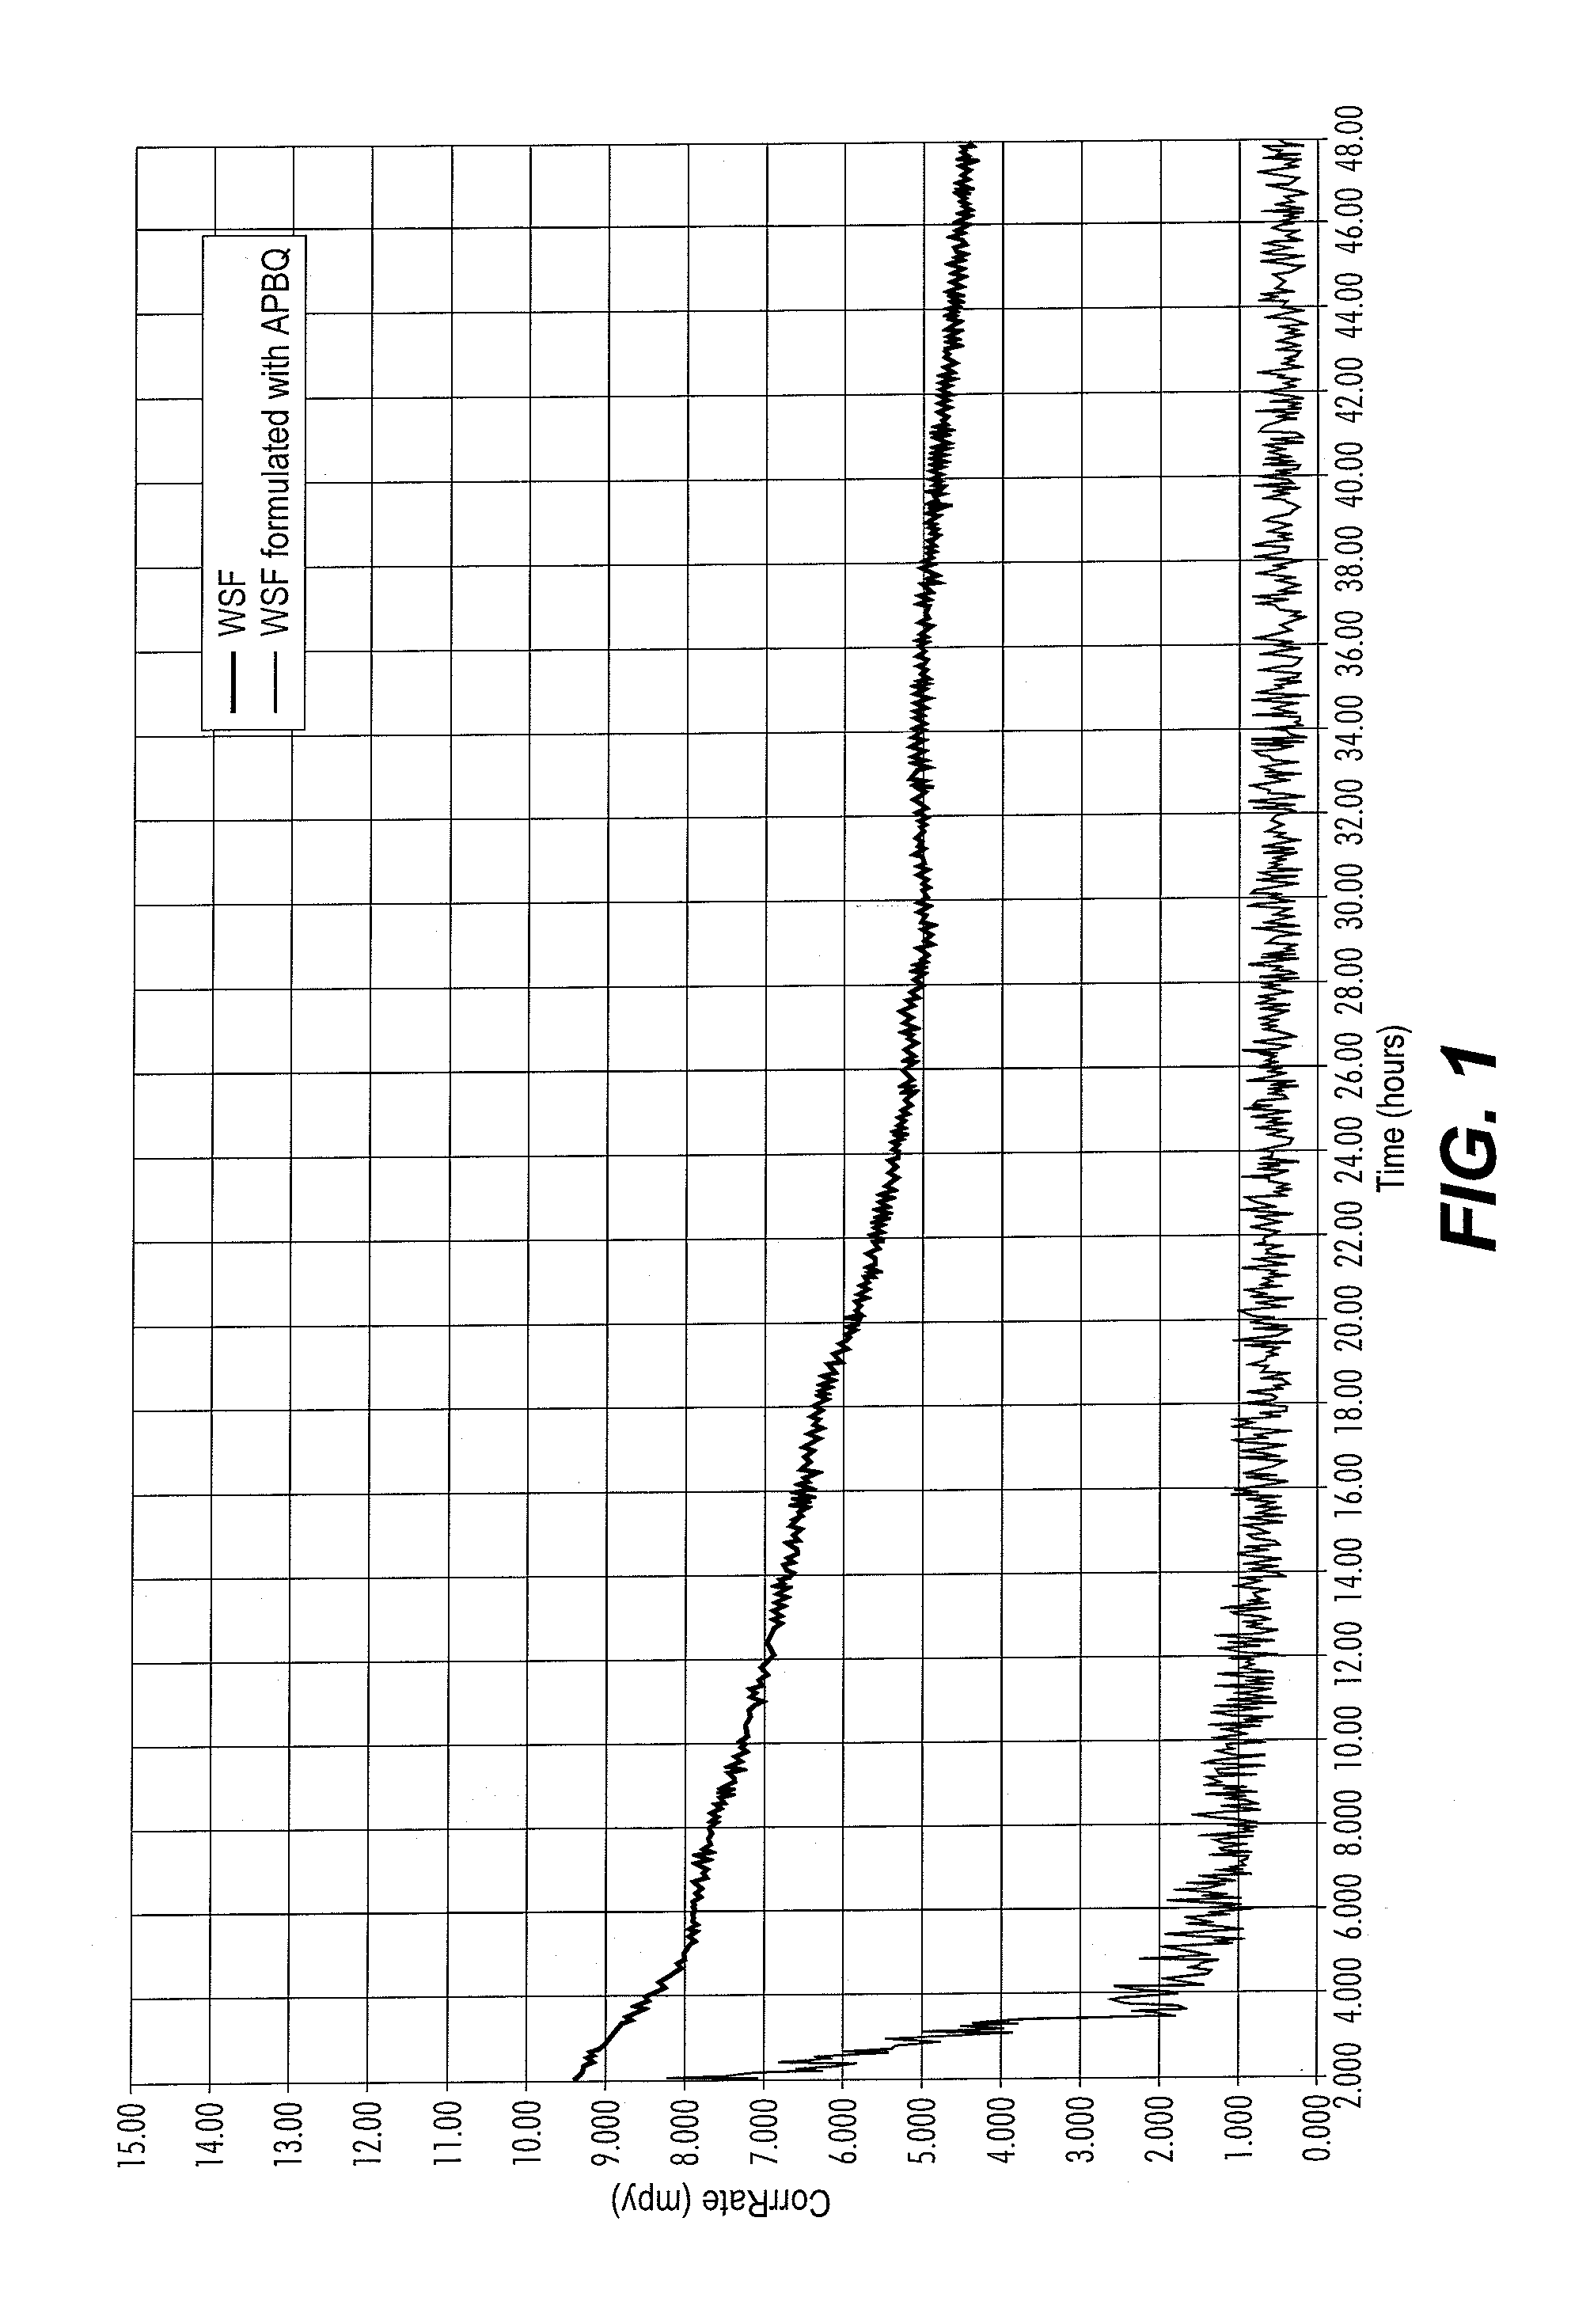 Method of using corrosion inhibitors derived from spent fluids in the treatment of wells